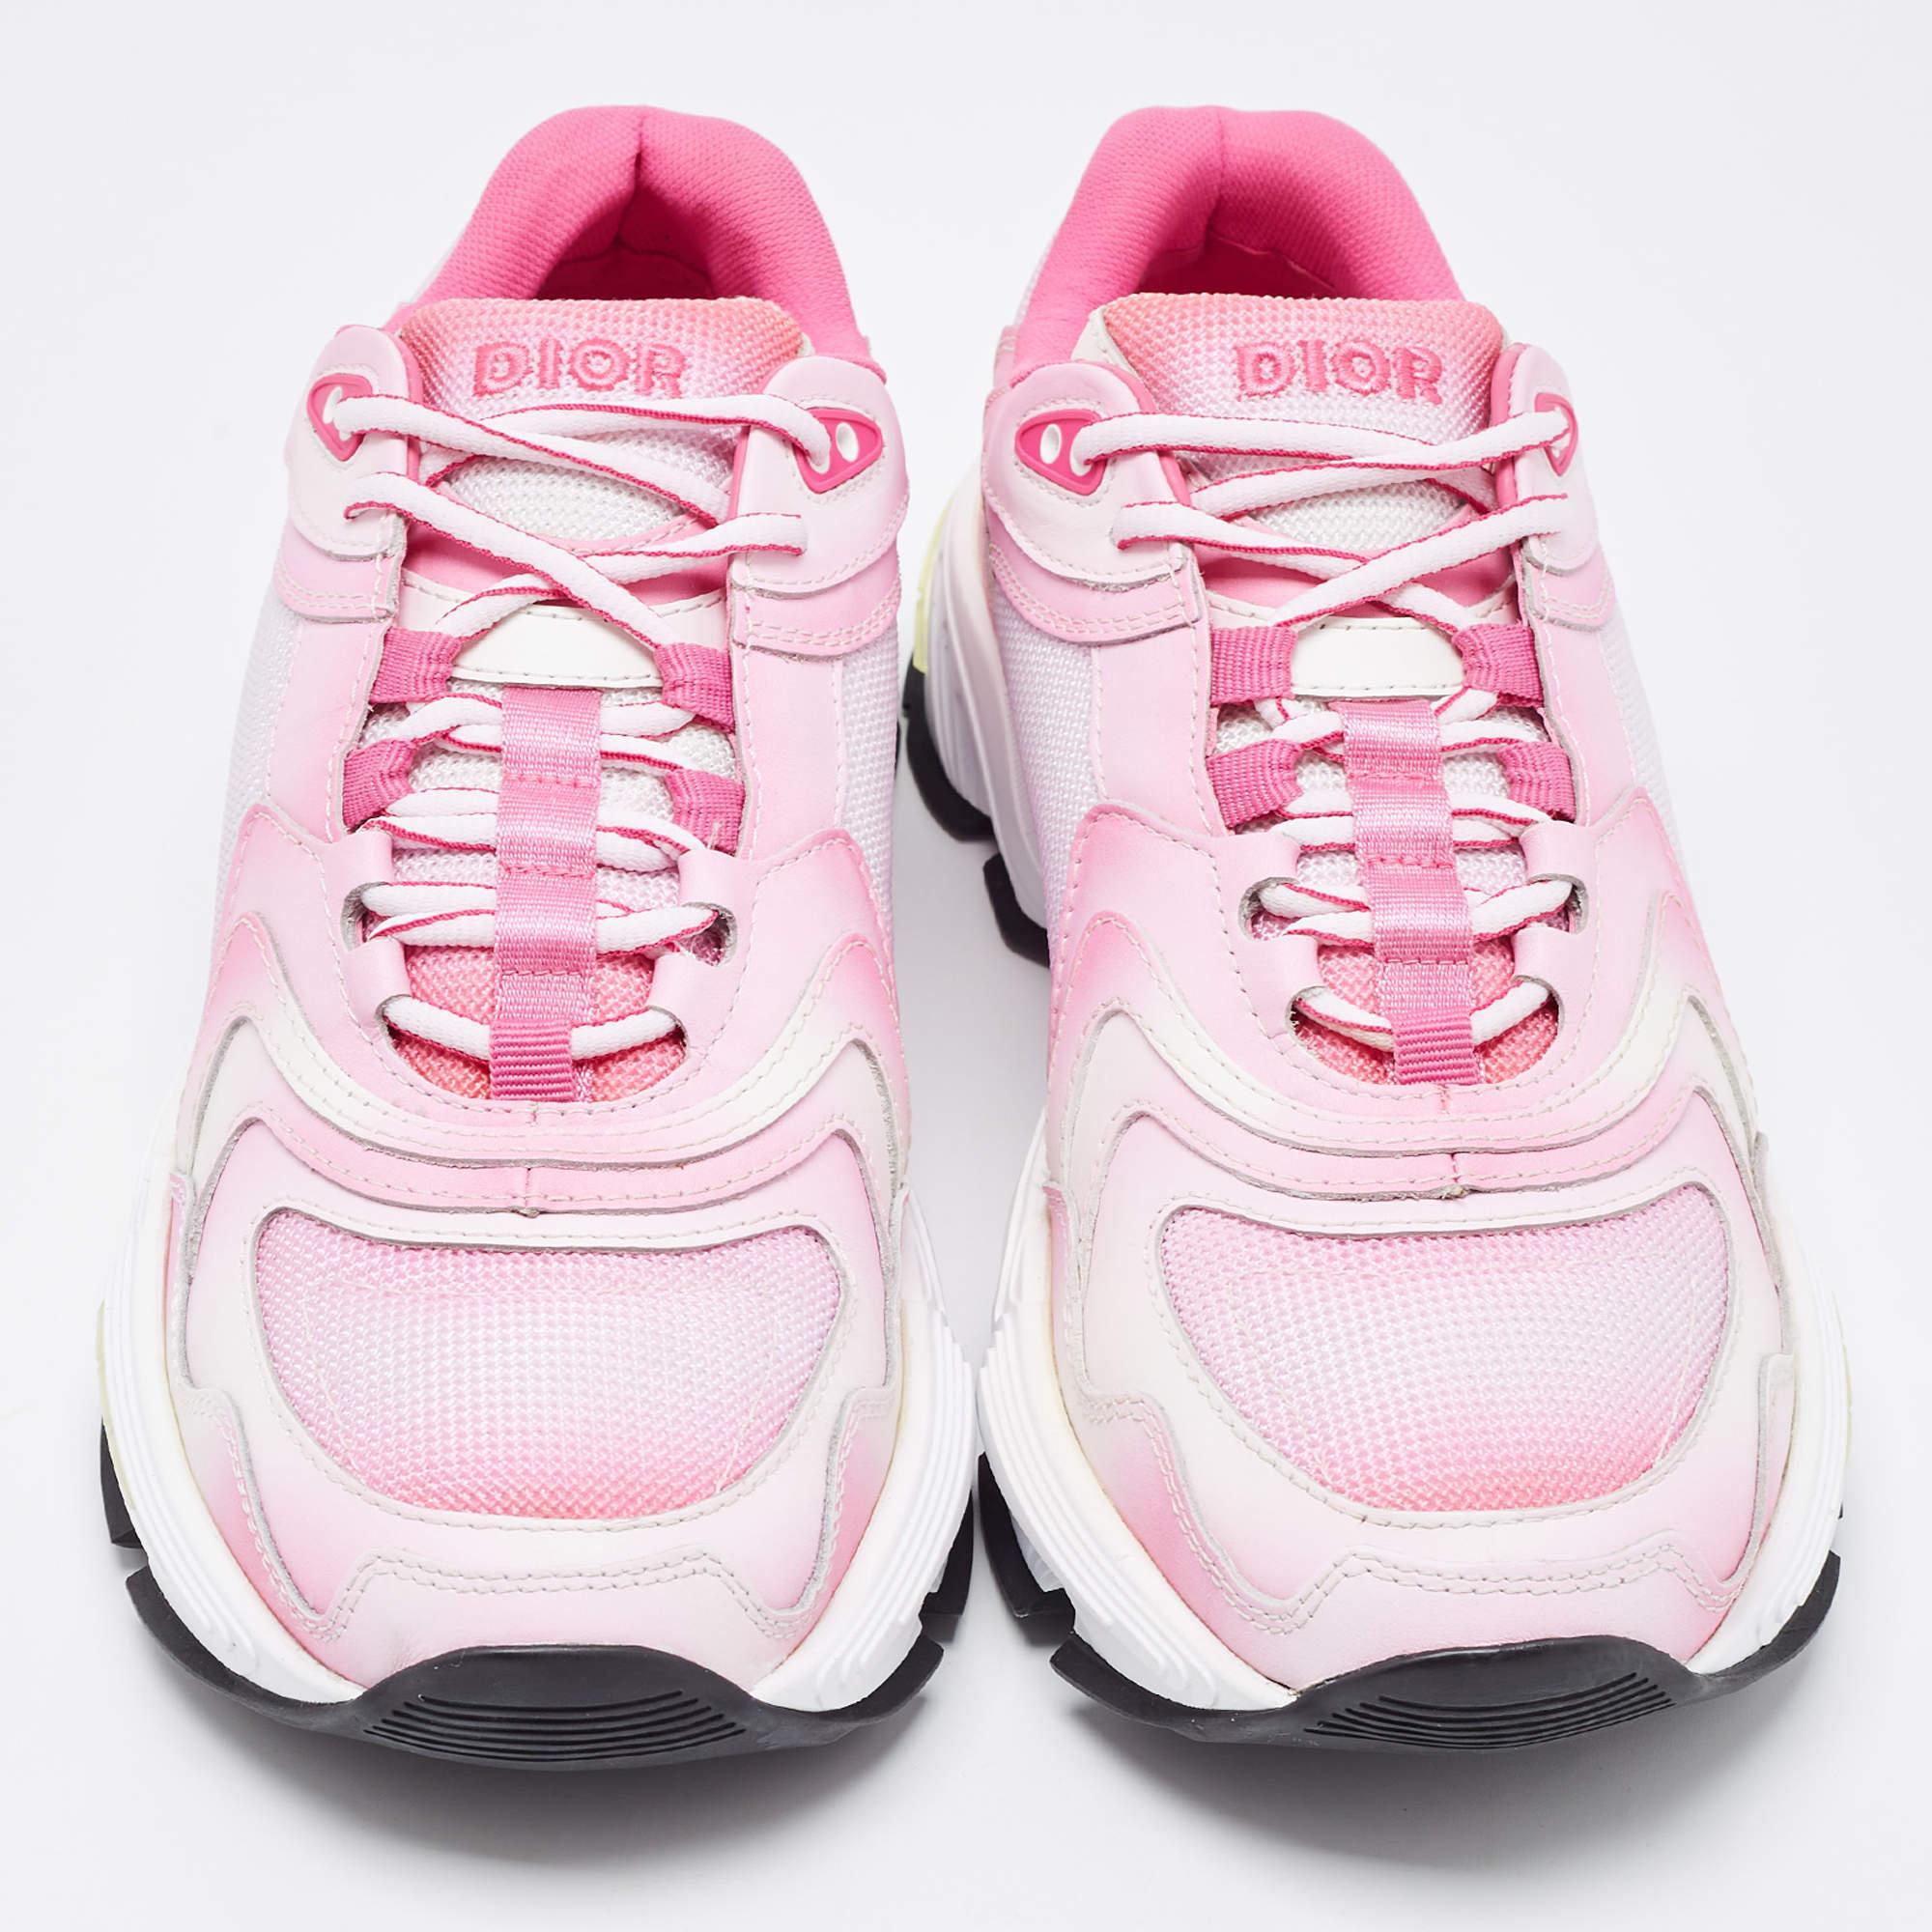 Dior Pink/White Mesh and Leather CD1 Gradient Sneakers Size 41 In New Condition For Sale In Dubai, Al Qouz 2